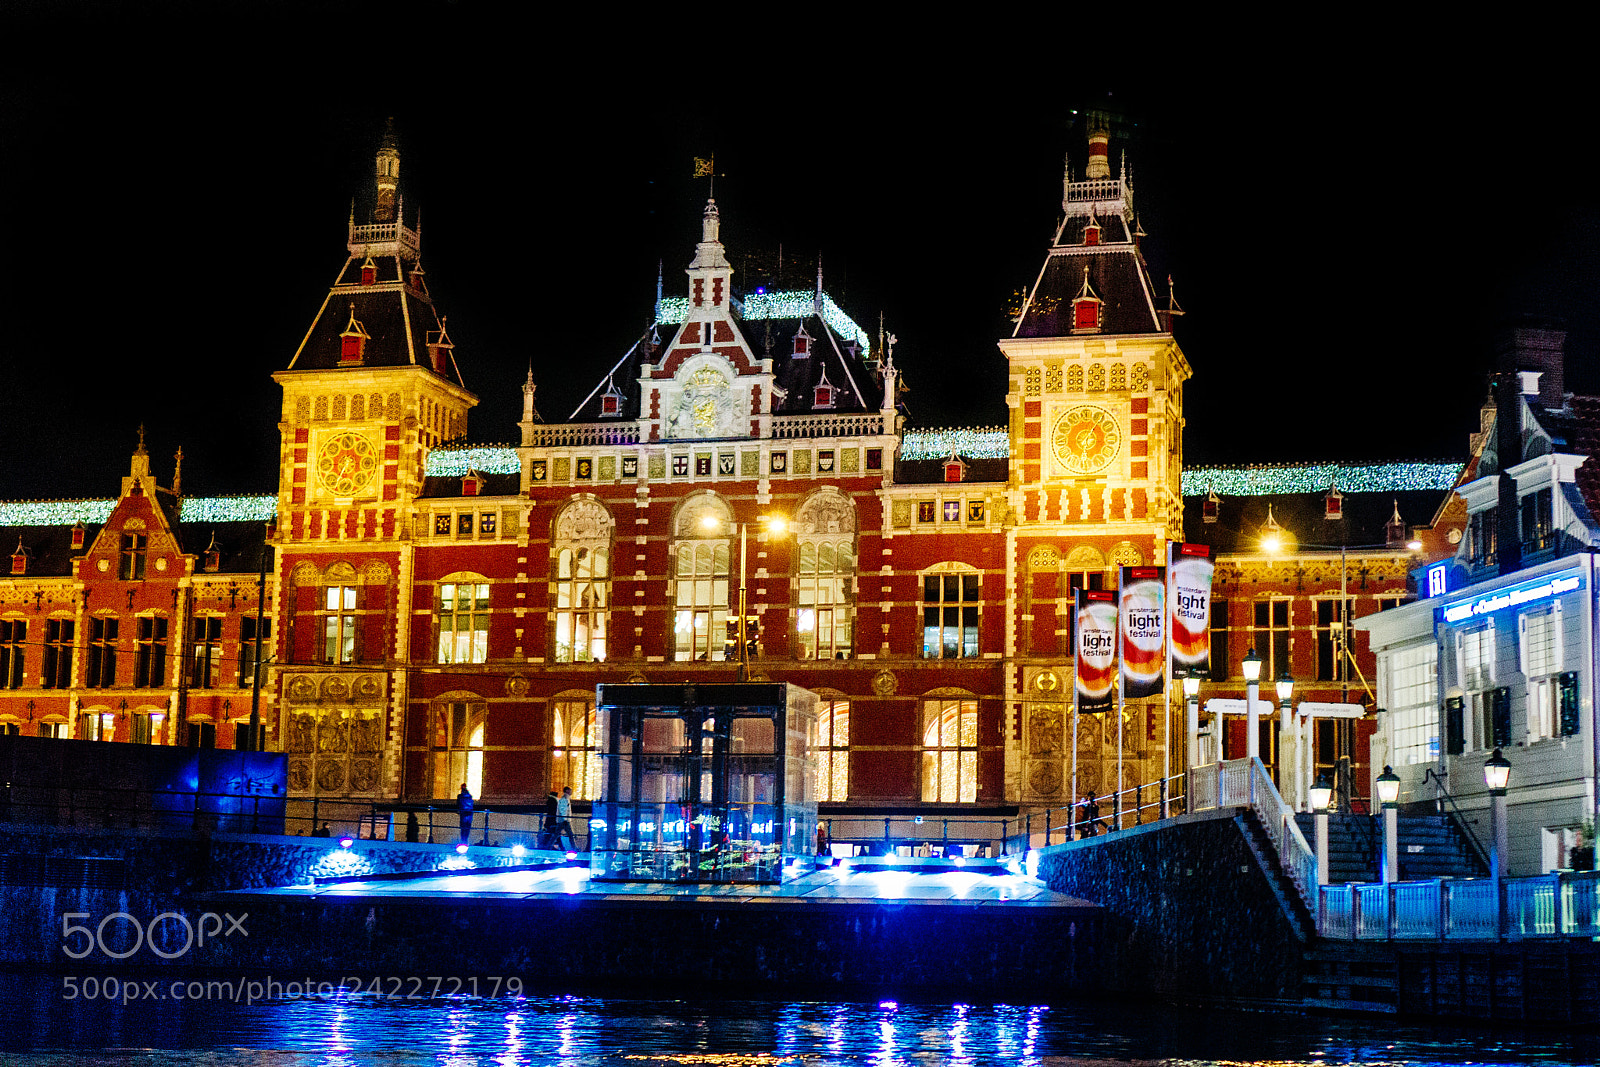 Sony a6000 sample photo. Amsterdam central railway station photography